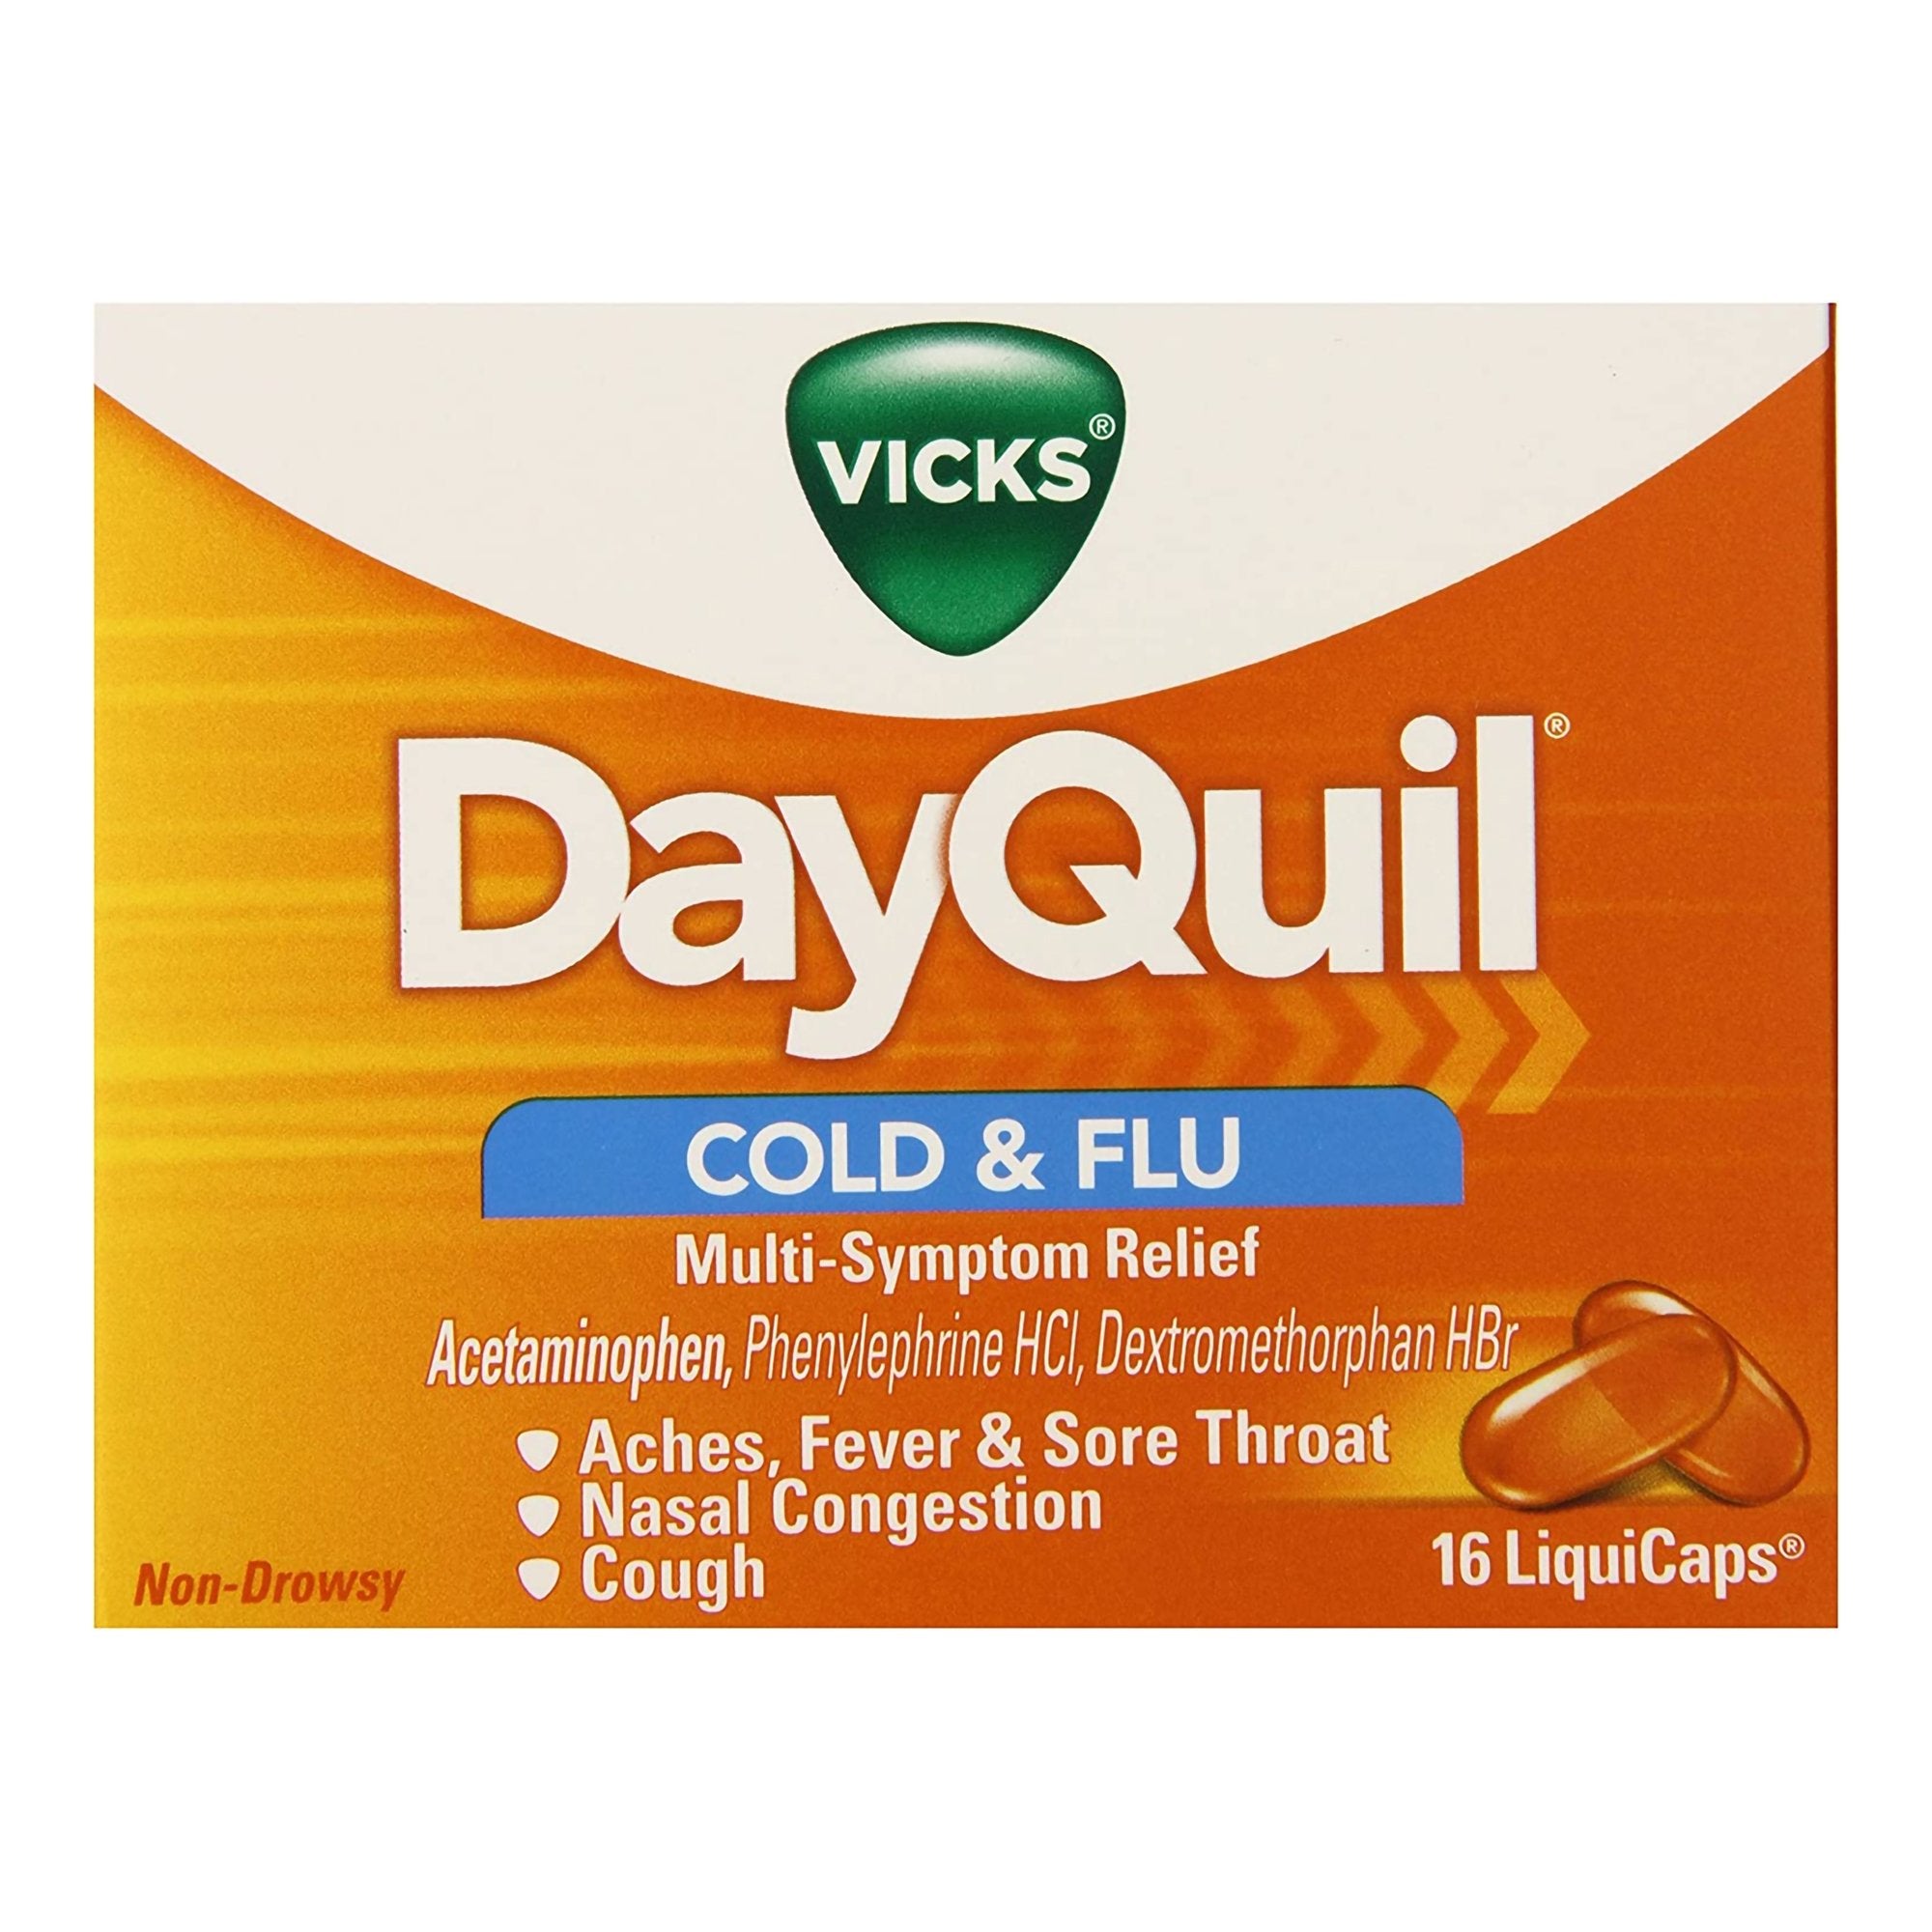 Cold and Cough Relief Vicks 325 mg - 10 mg - 5 mg Strength Gelcap 16 per Box